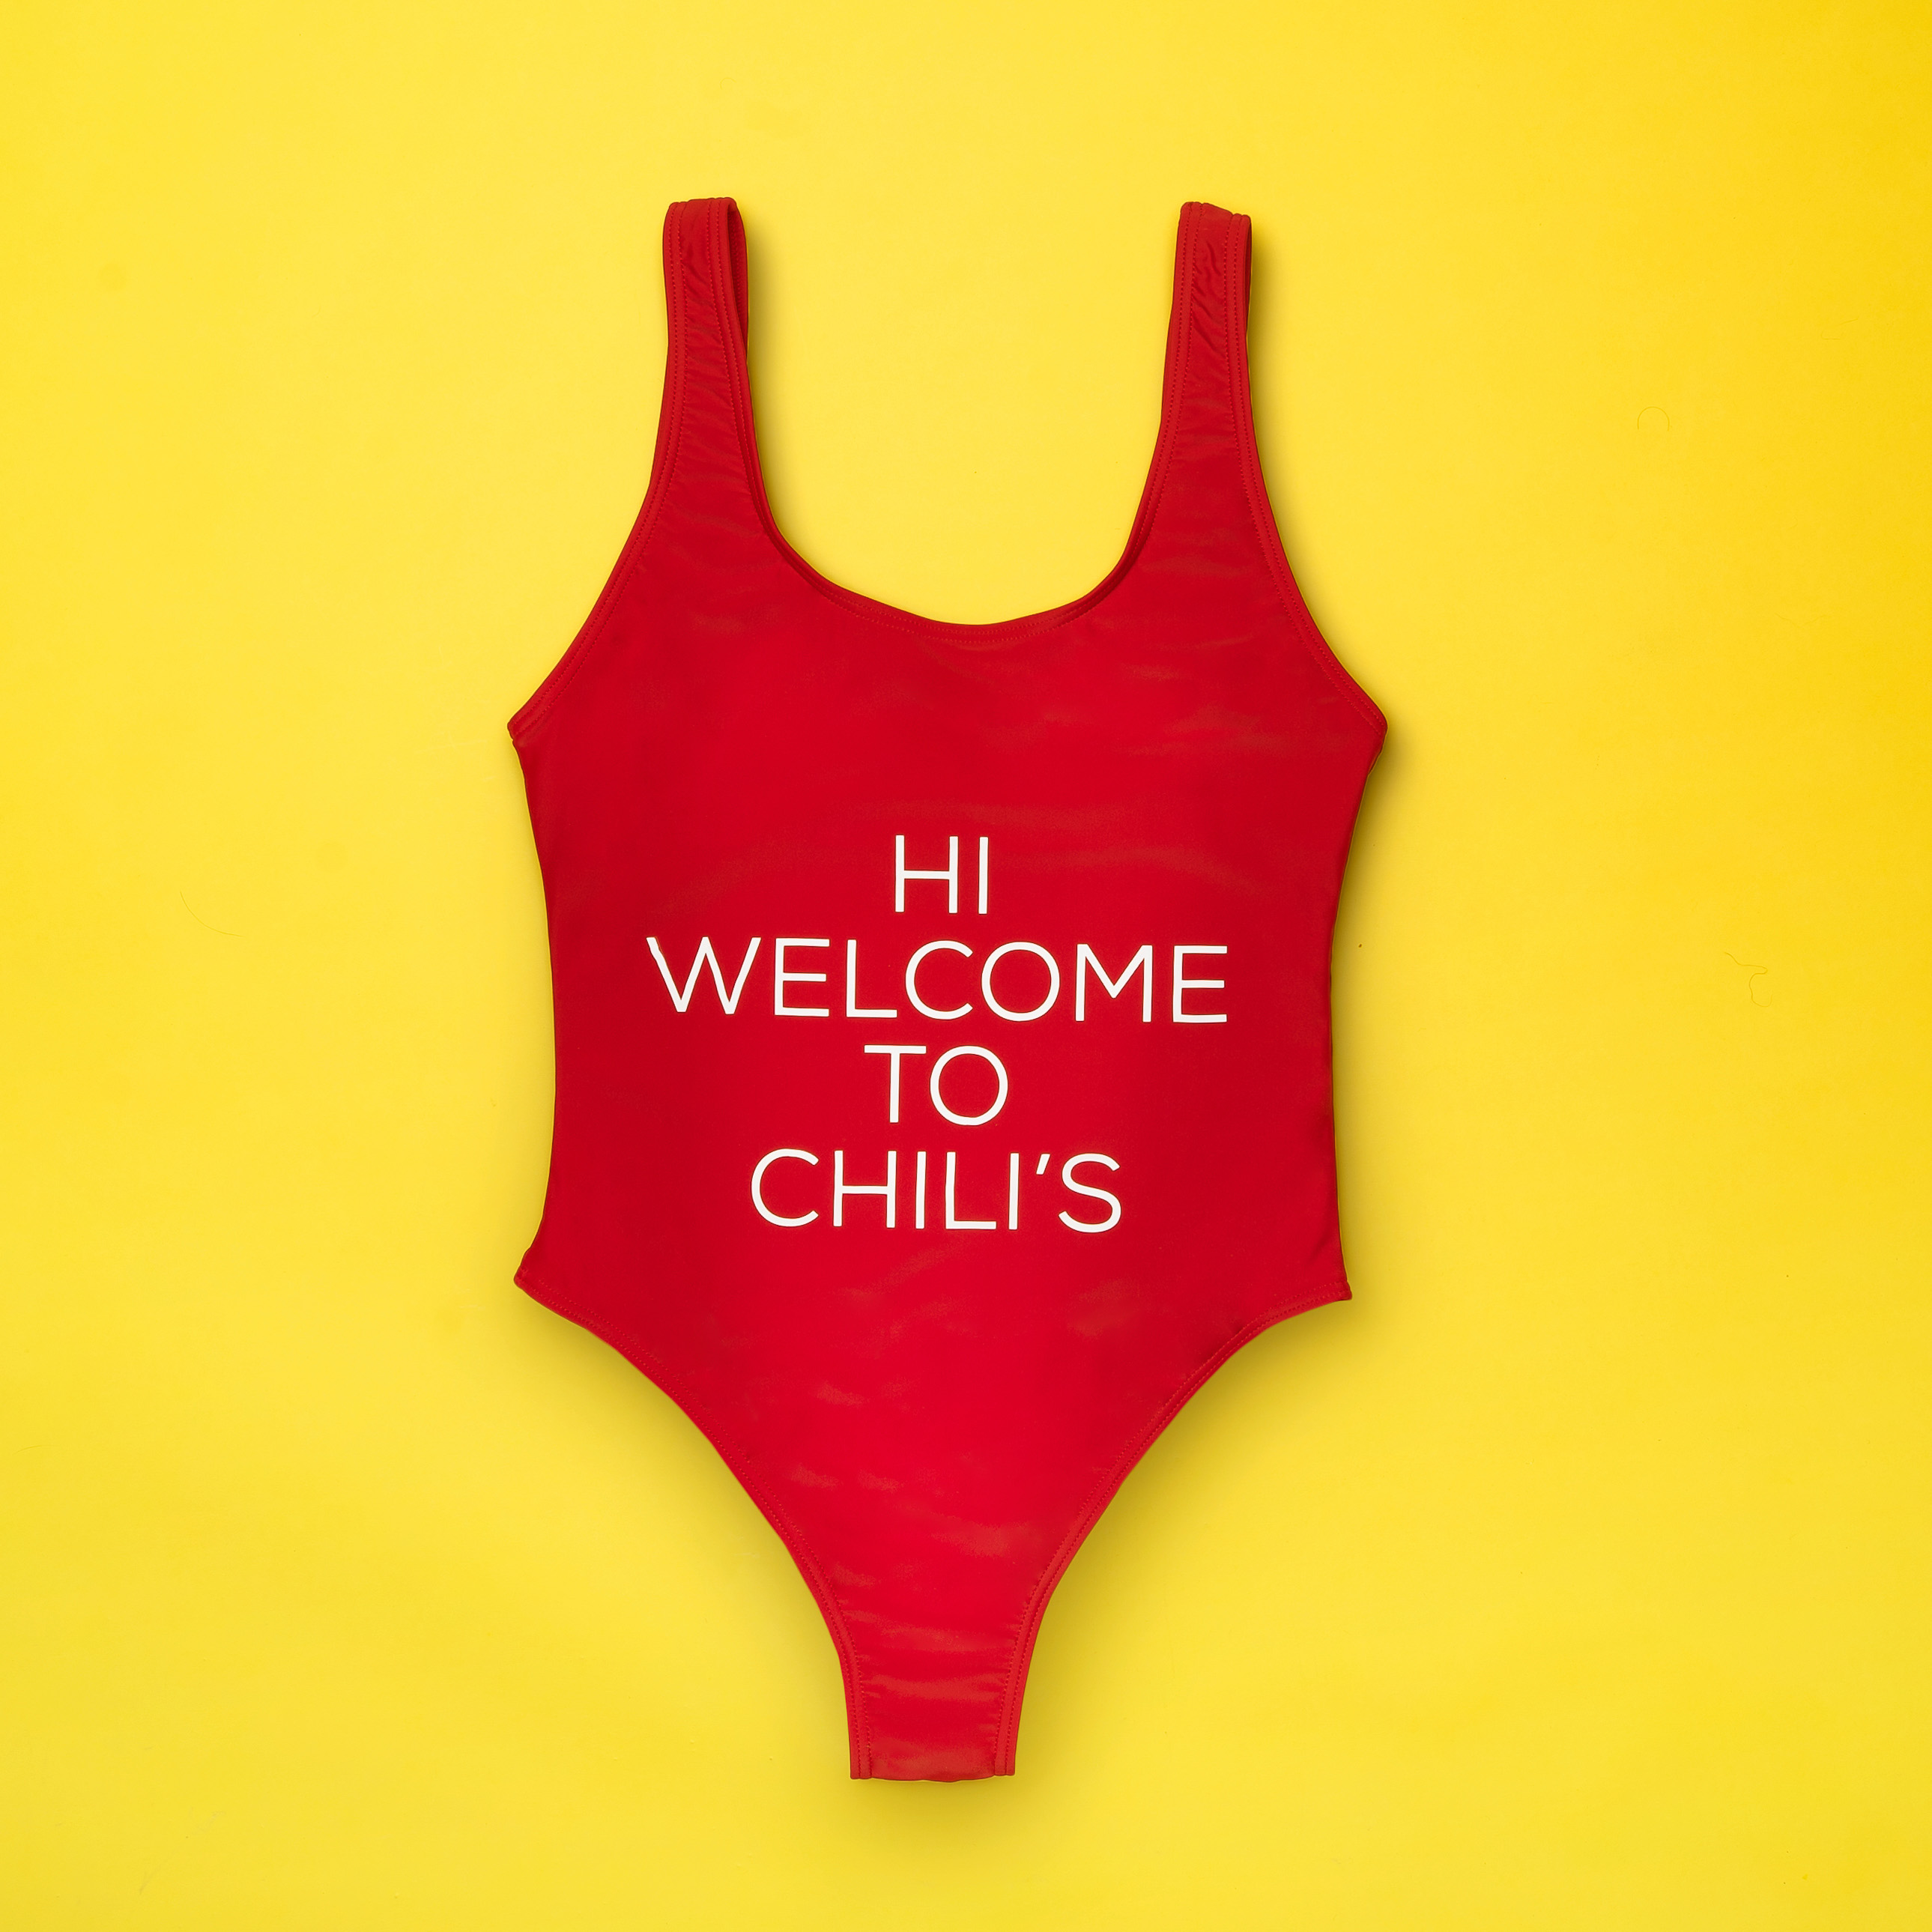 Just add water (or not) with this fashionable one-piece show-stopper that combines that classical causal Chili’s vibe with holes for your arms, legs, and head.